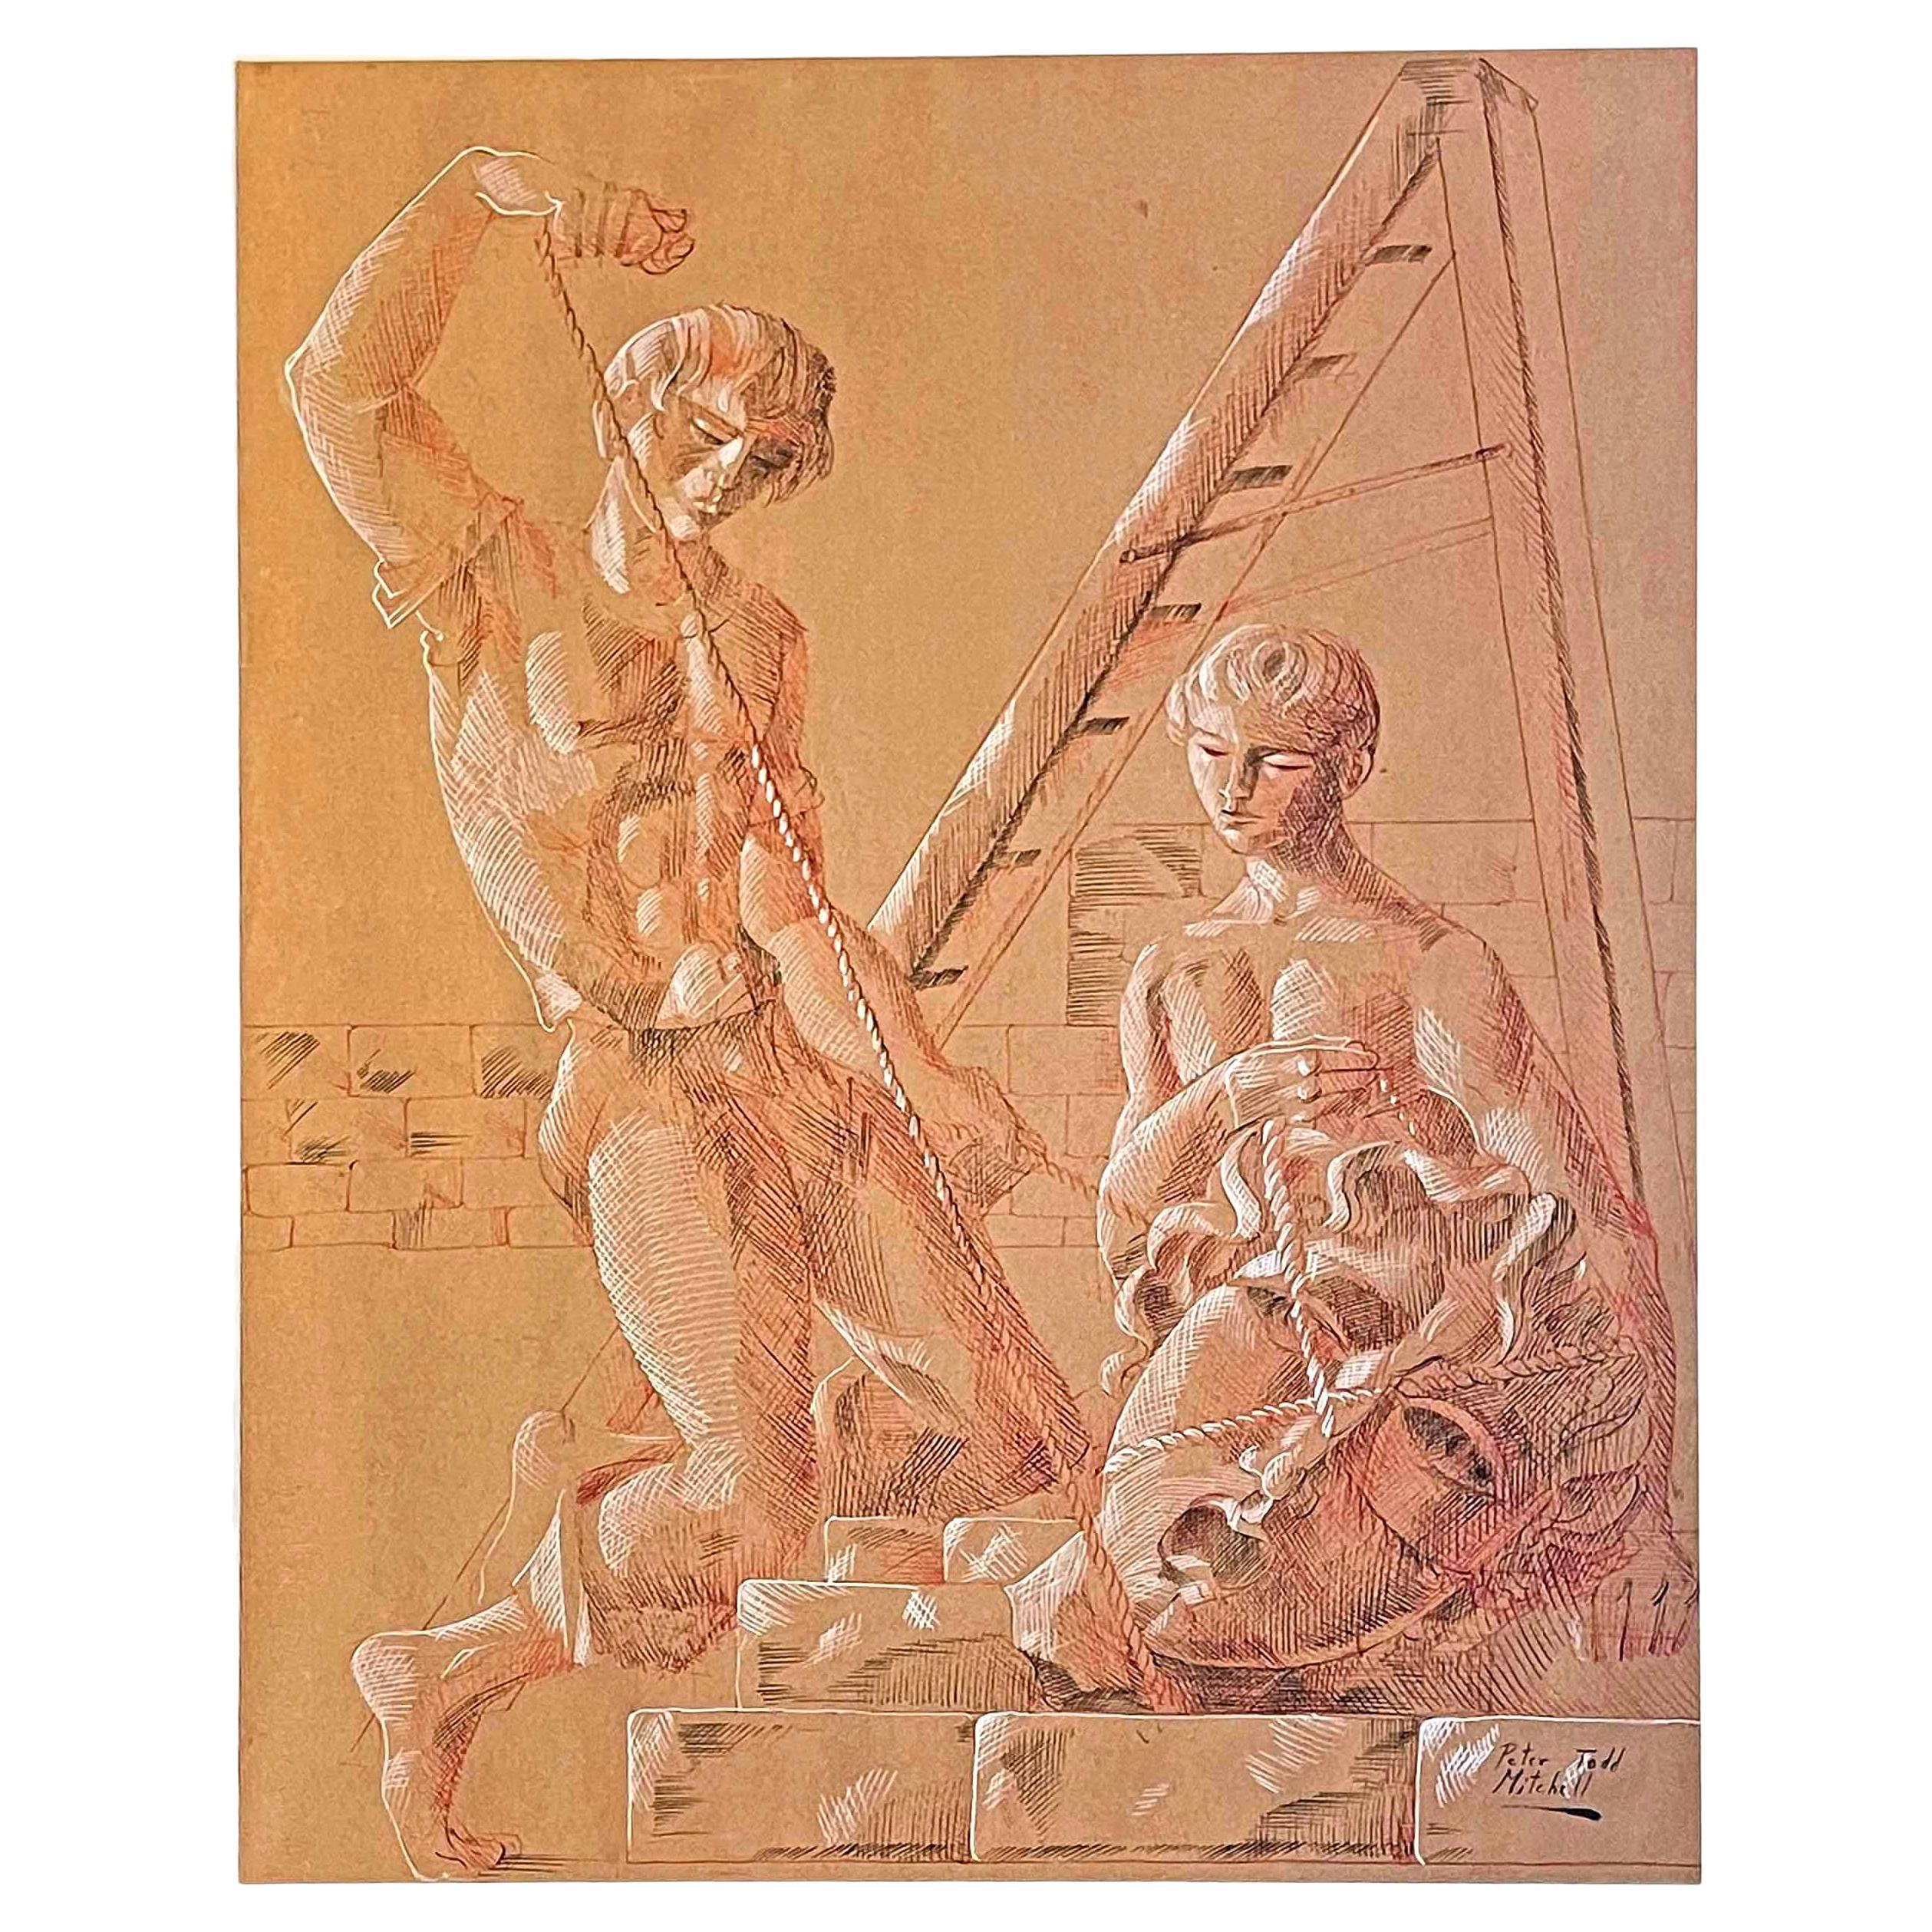 "Roping Sculpture", Drawing of Two Youths w/ Classical Stone Head, Burnt Sienna For Sale